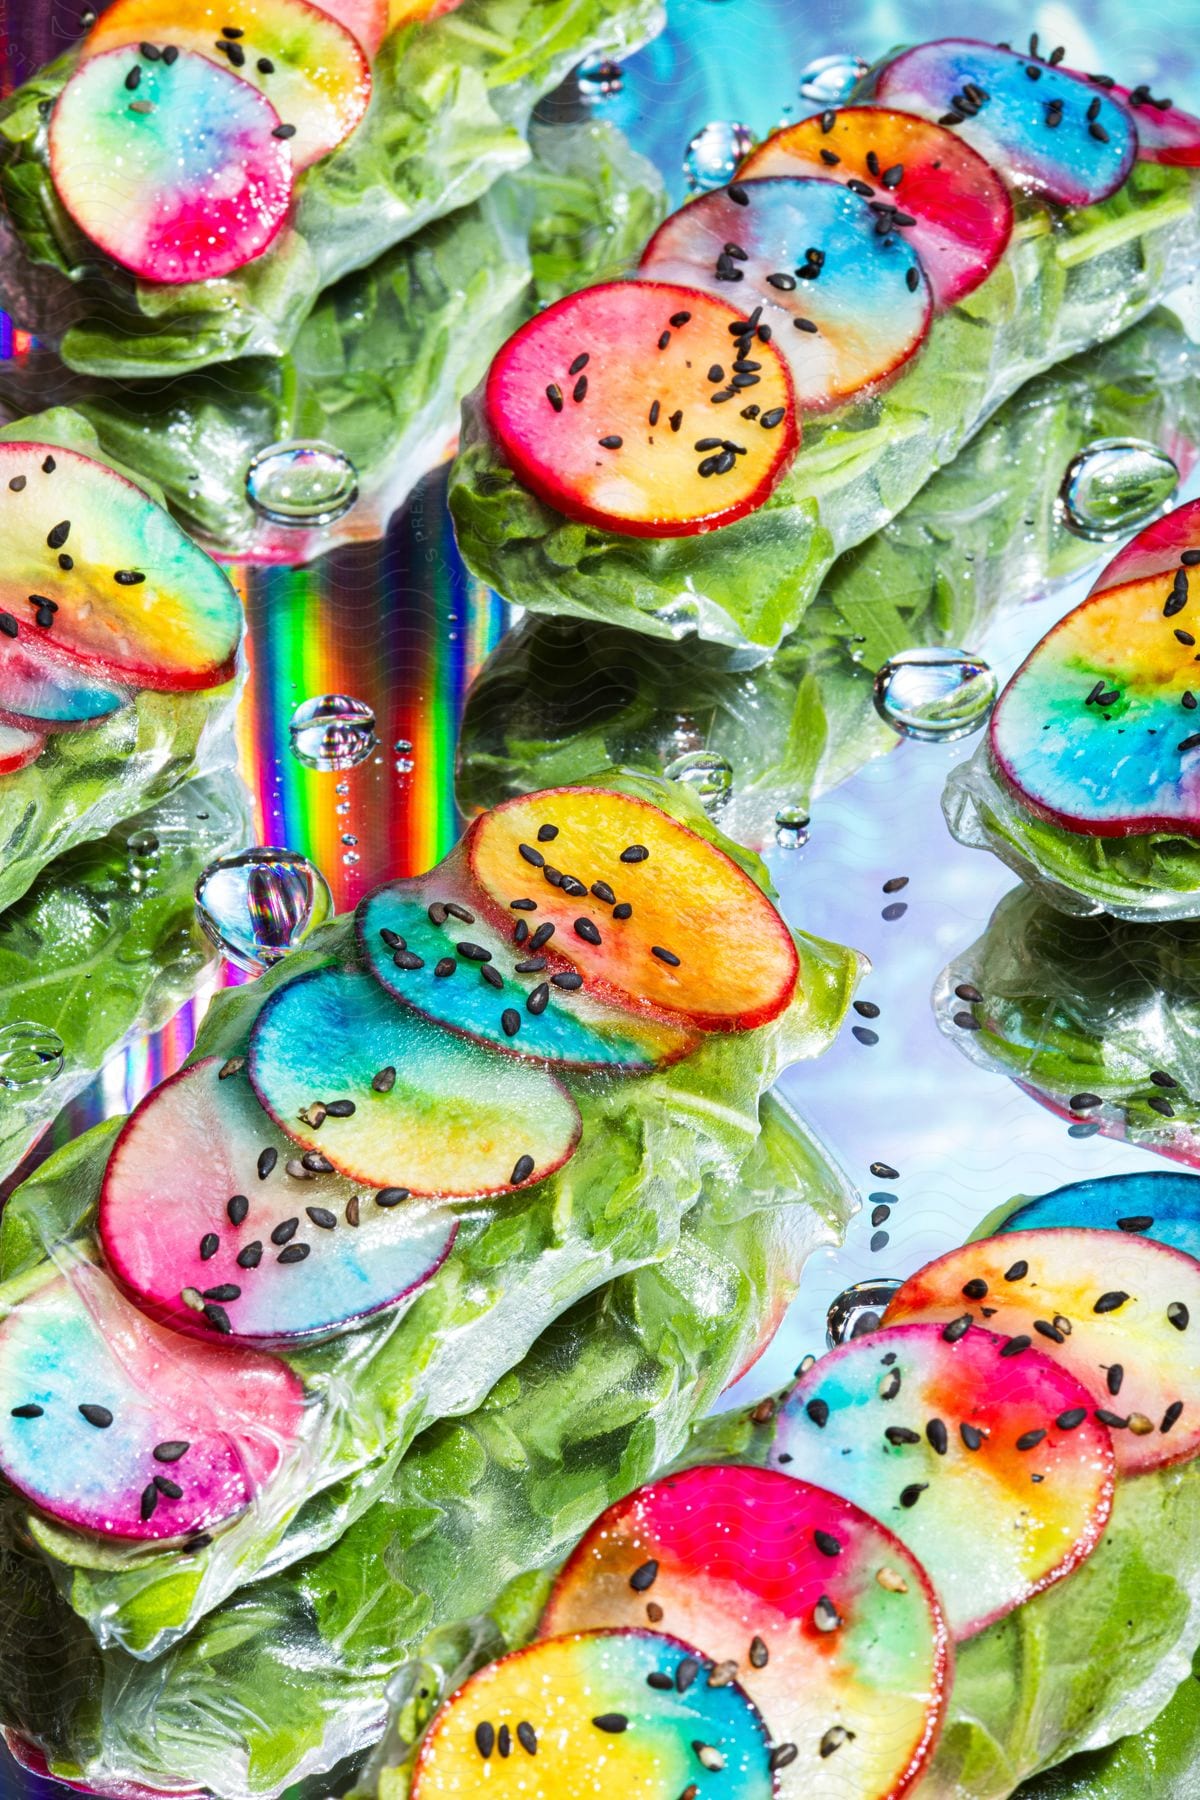 A painting of a colorful salad with sliced radishes dyed in various colors and water droplets on the leaves